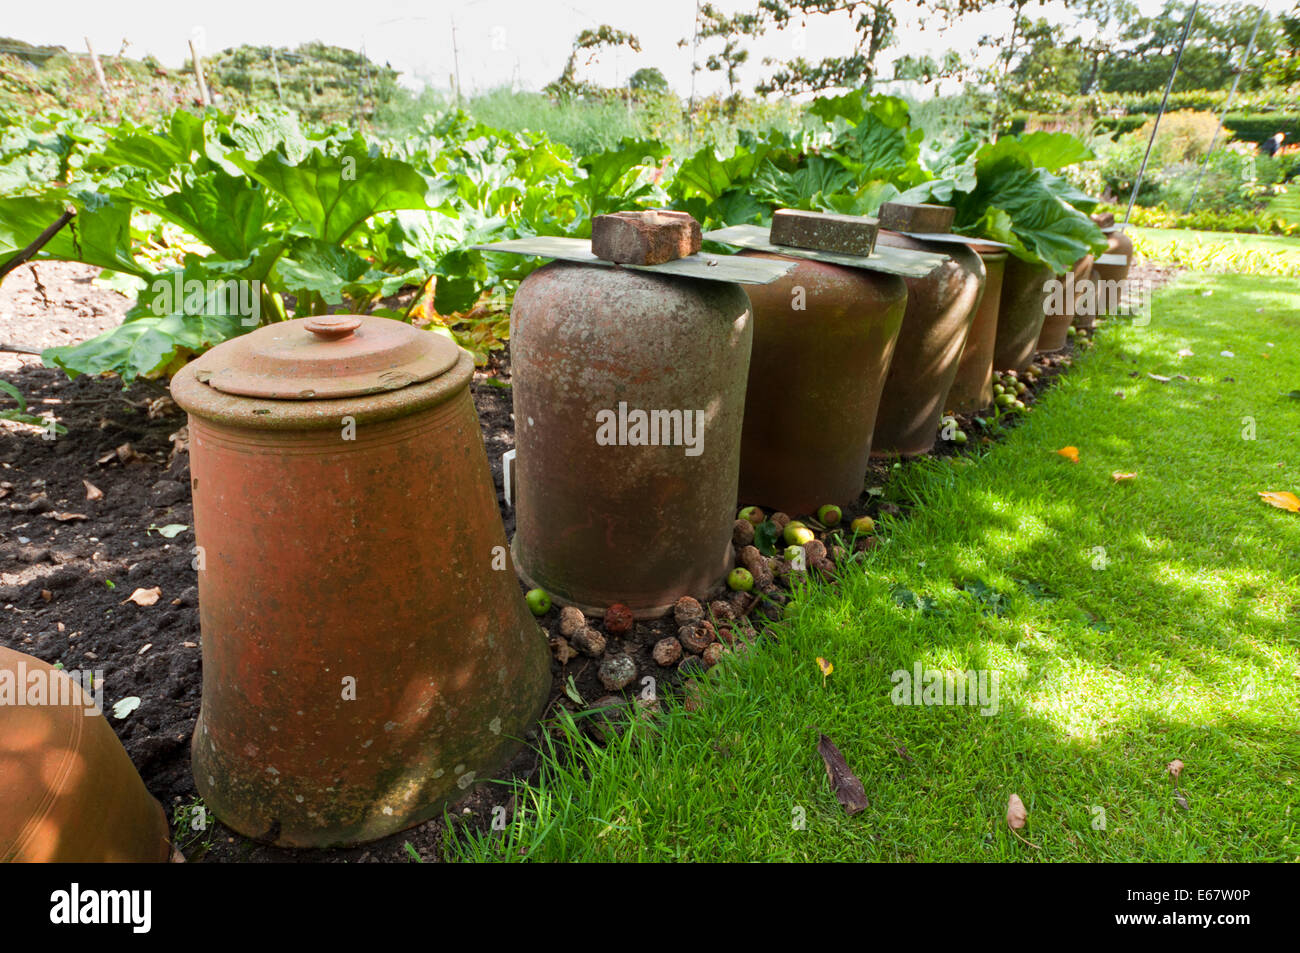 forcing rhubarb Terracotta bell jars cloches Stock Photo